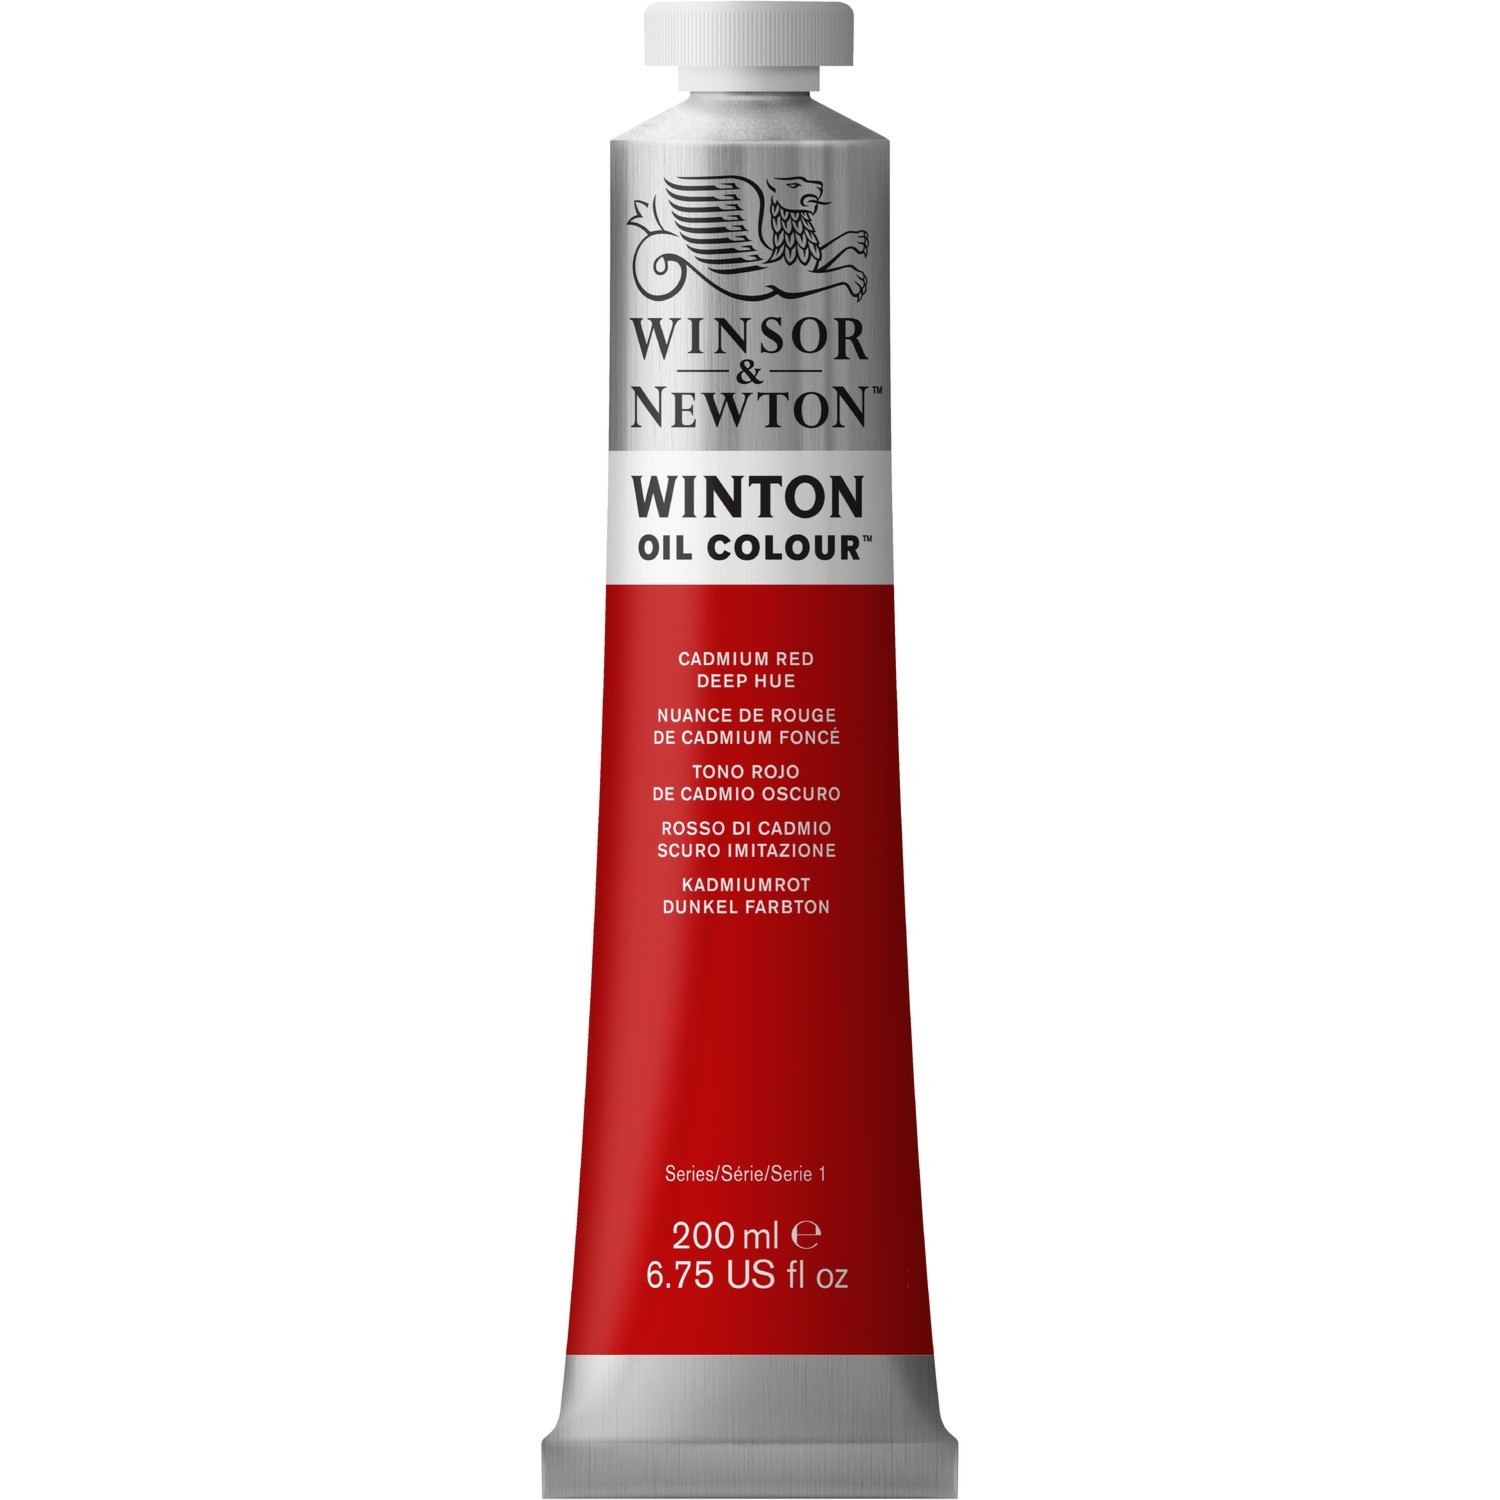 Winsor and Newton 200ml Winton Oil Colours - Deep red hue Image 1